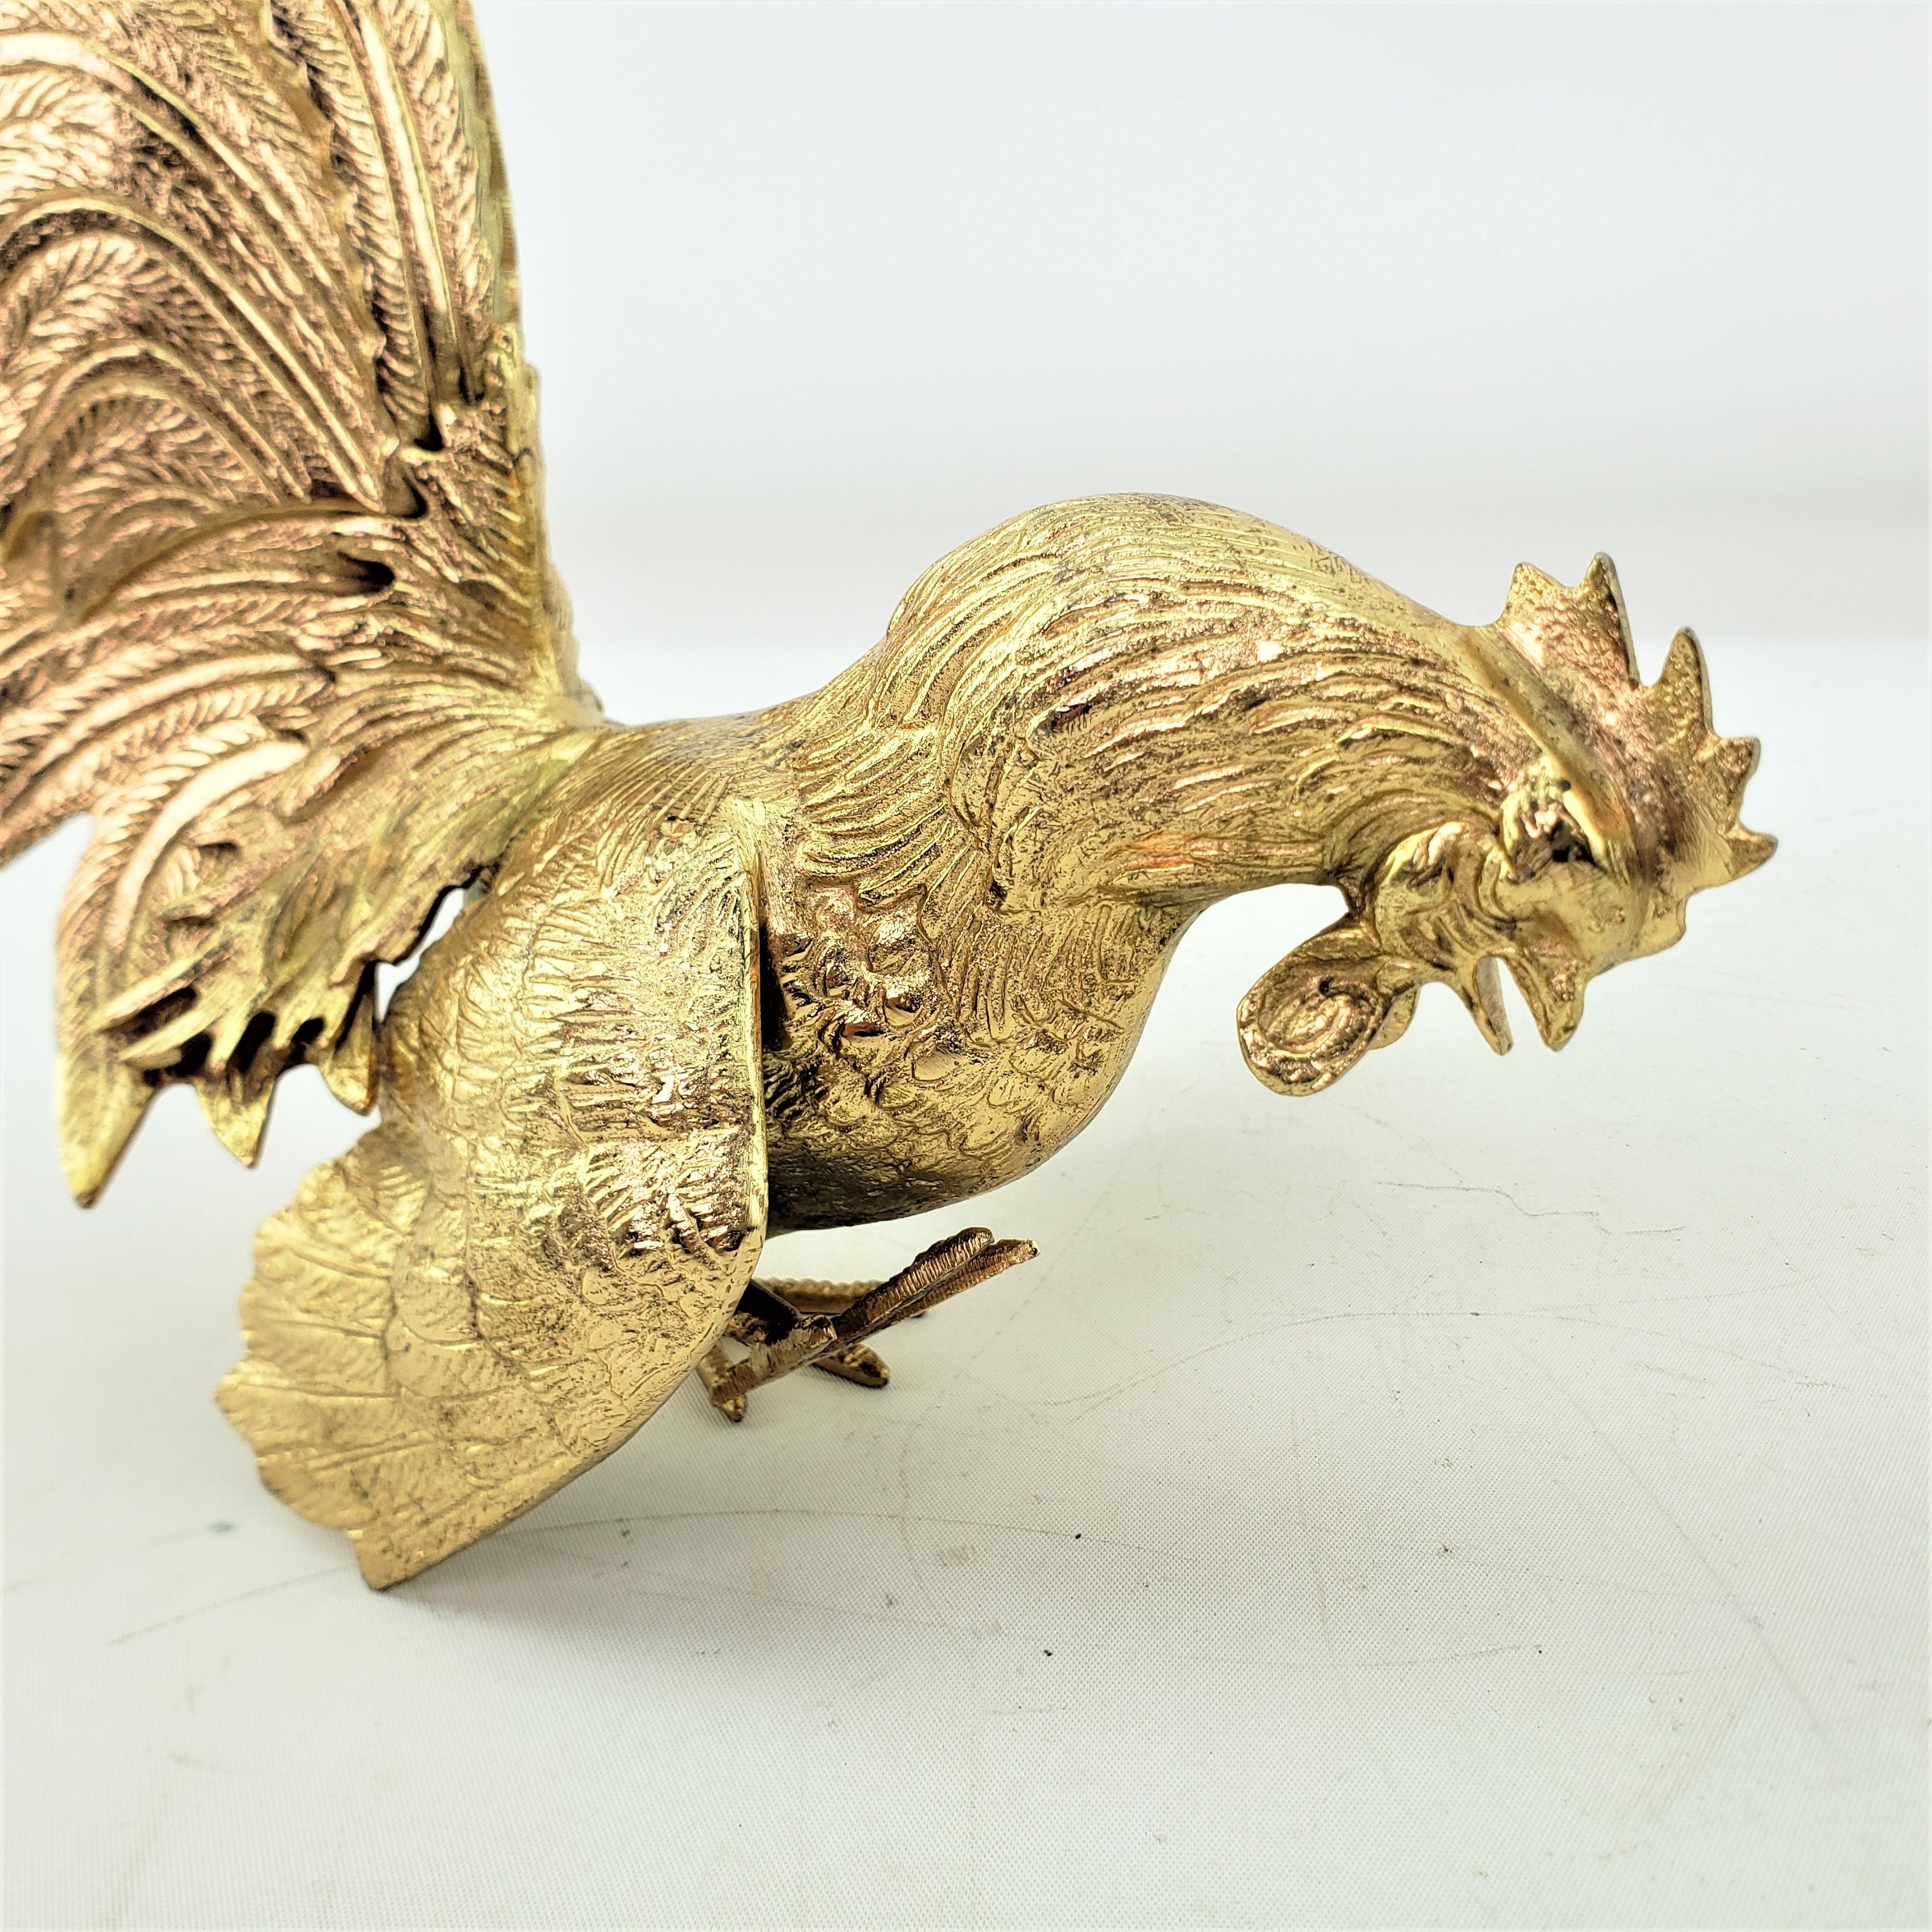 Pair of Ornate Gilt Finished Fighting Rooster or Cockerel Table Sculptures For Sale 2